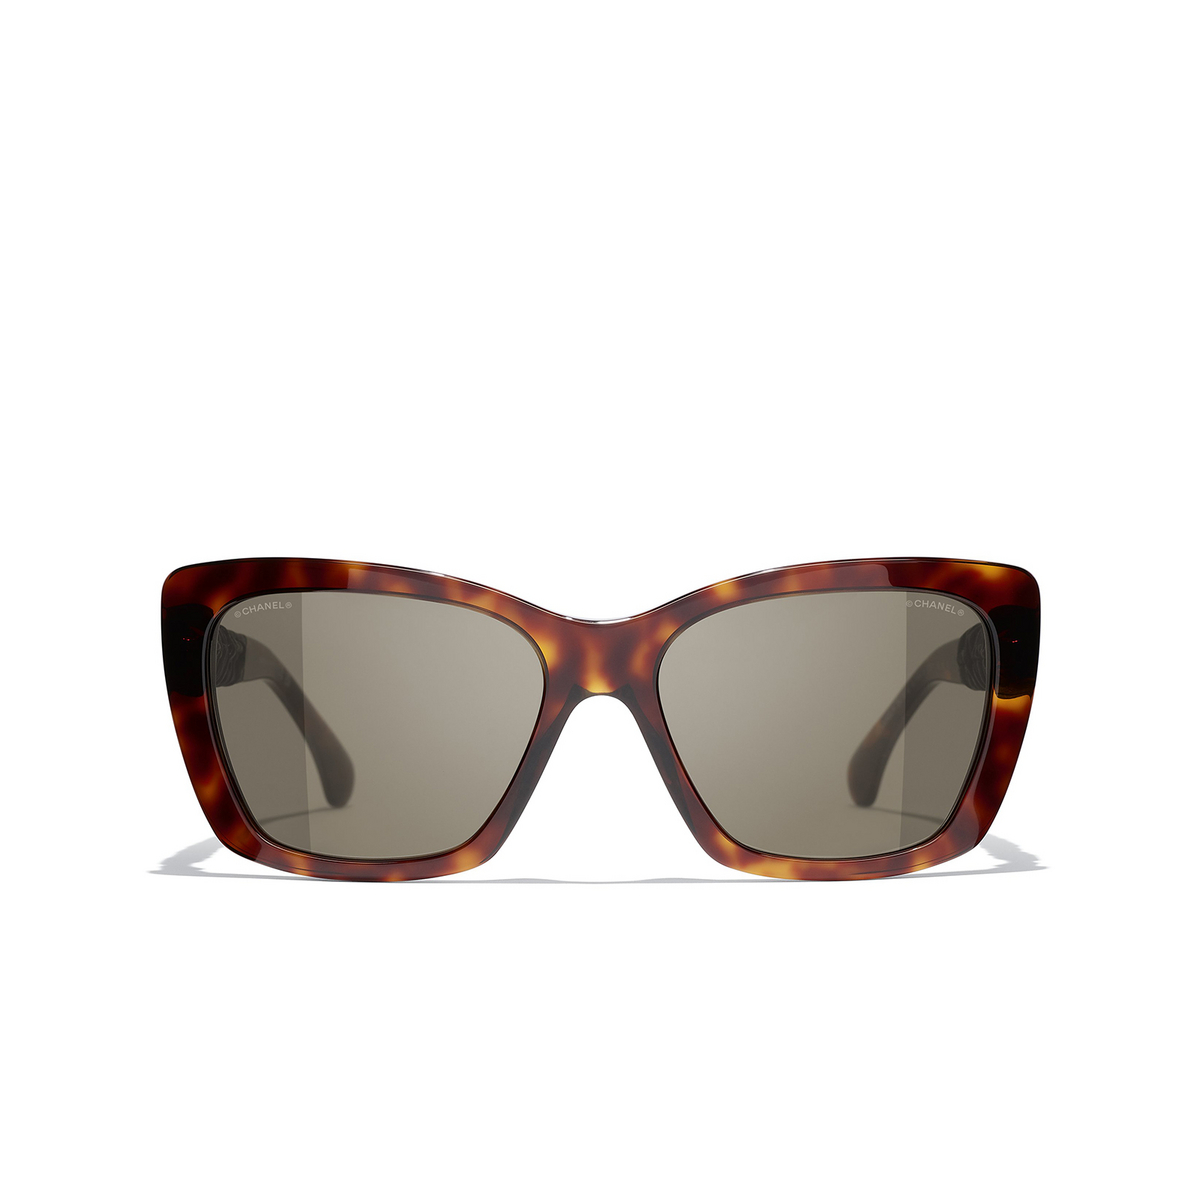 CHANEL butterfly Sunglasses 1164/3 Dark Tortoise - front view